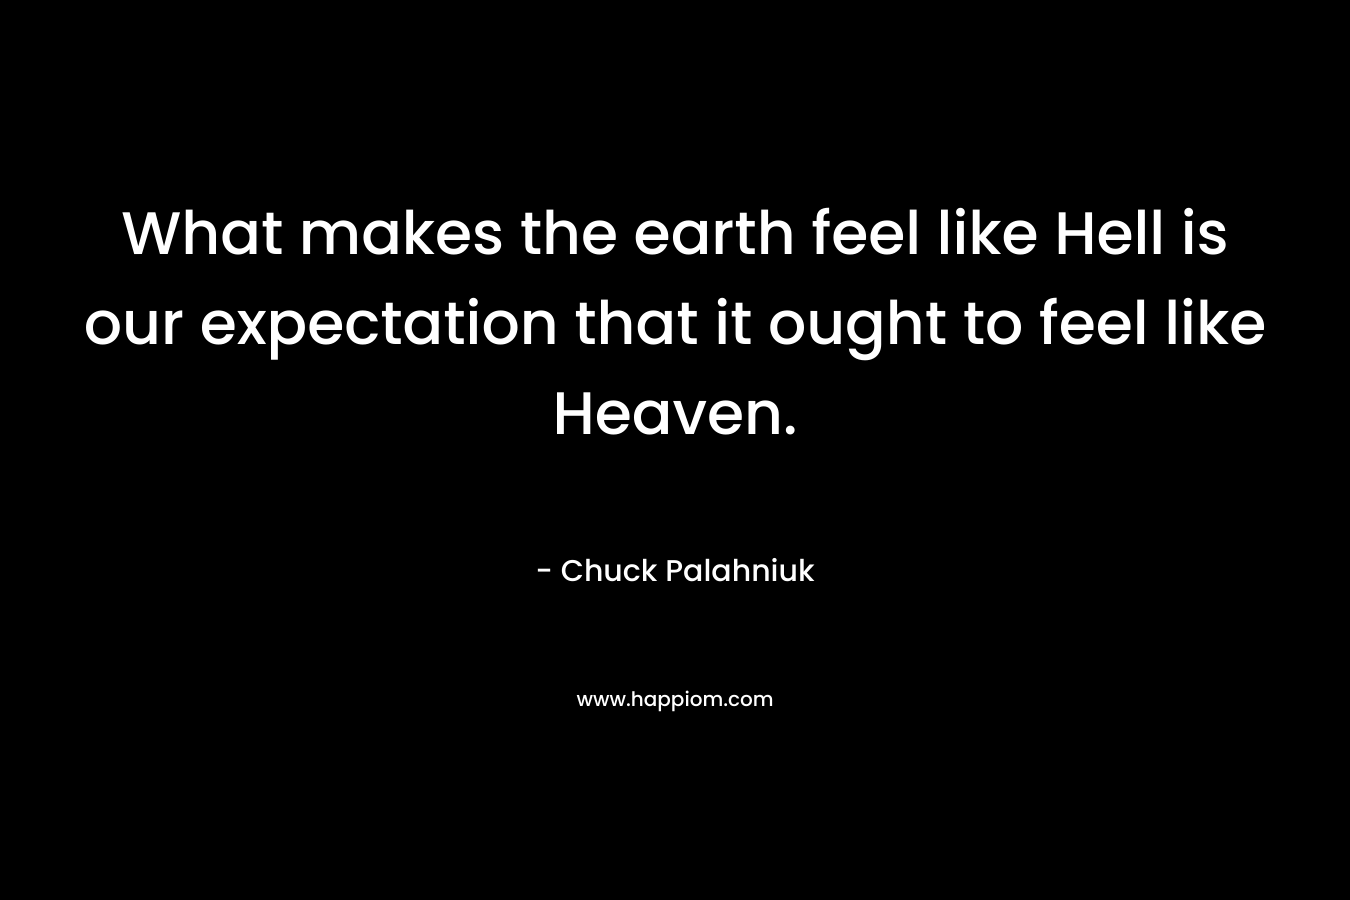 What makes the earth feel like Hell is our expectation that it ought to feel like Heaven.